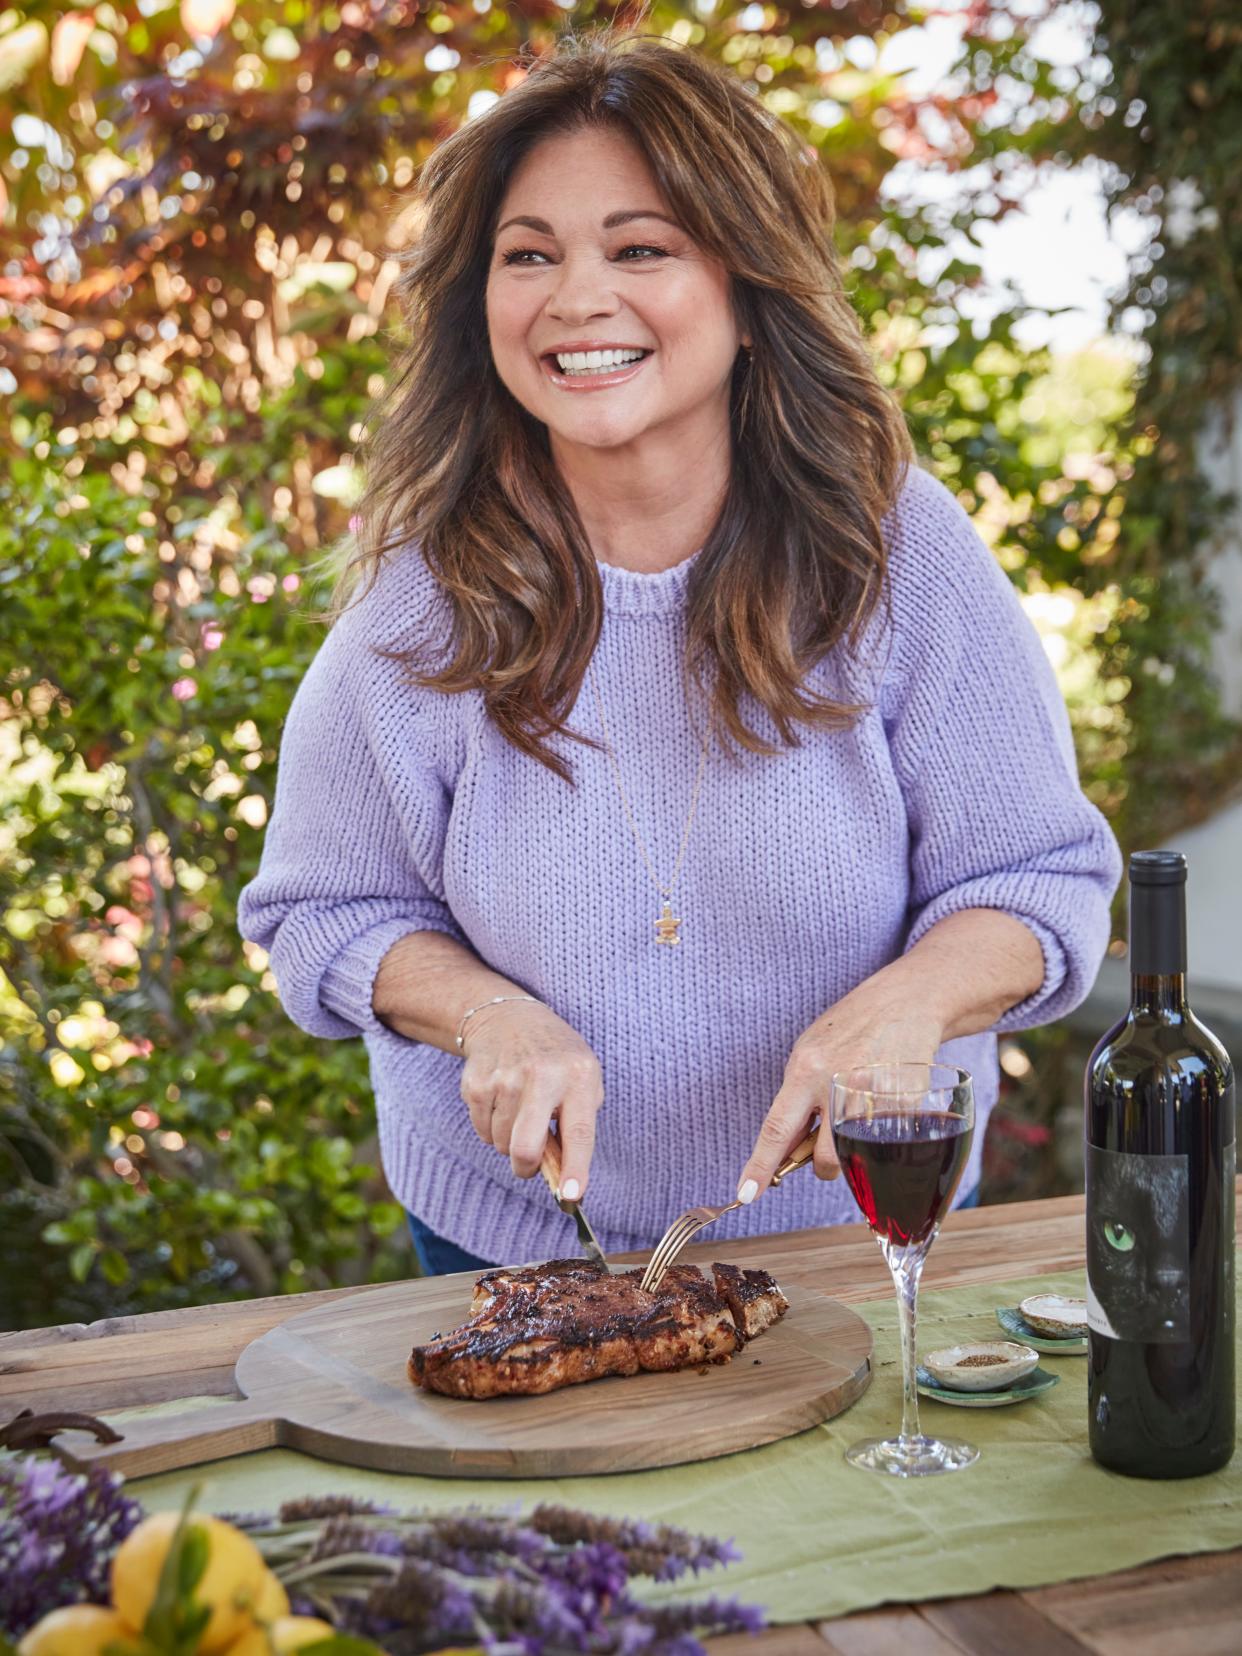 Food Network's now-canceled series "Valerie’s Home Cooking" and host Valerie Bertinelli are nominated for Daytime Emmys.